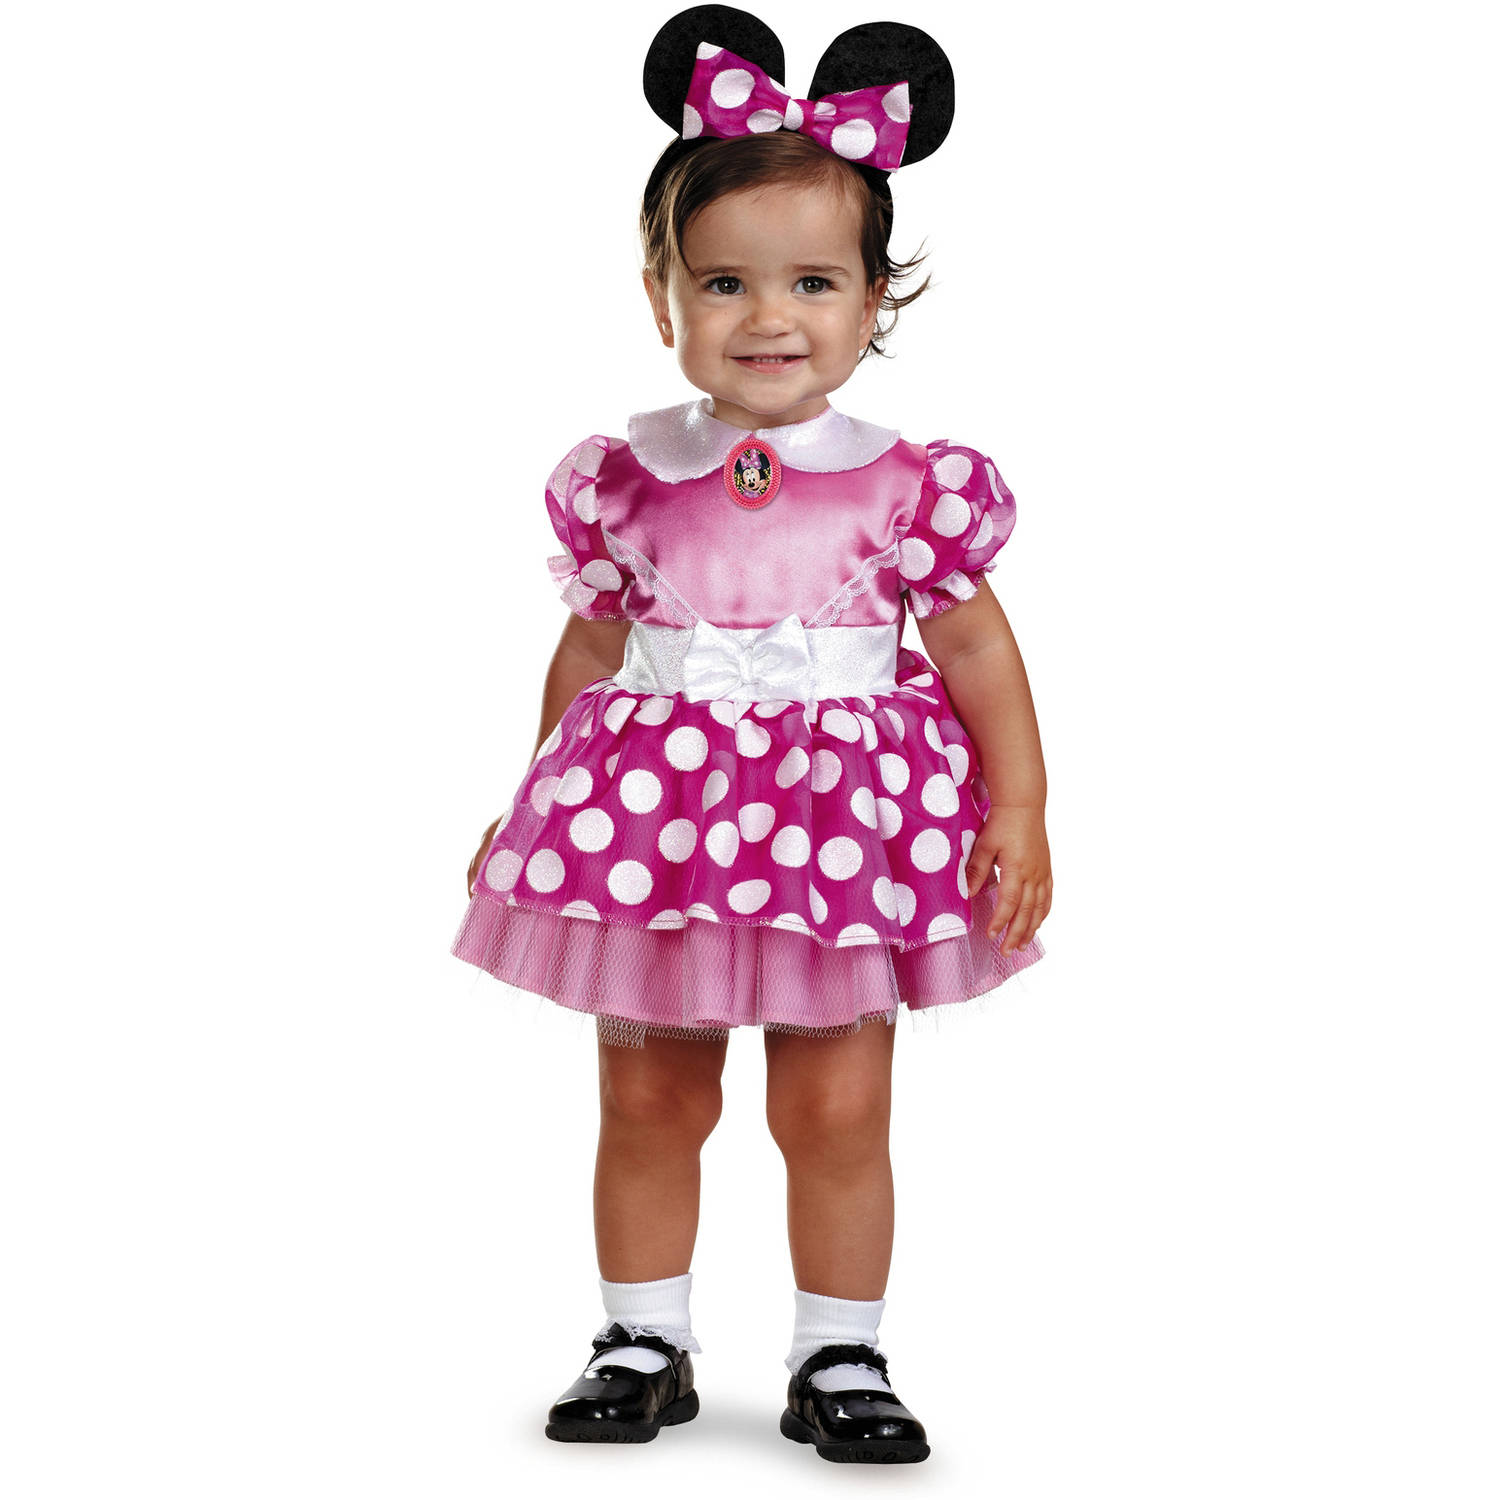 Pink Minnie Classic Infant Halloween Costume - image 1 of 2